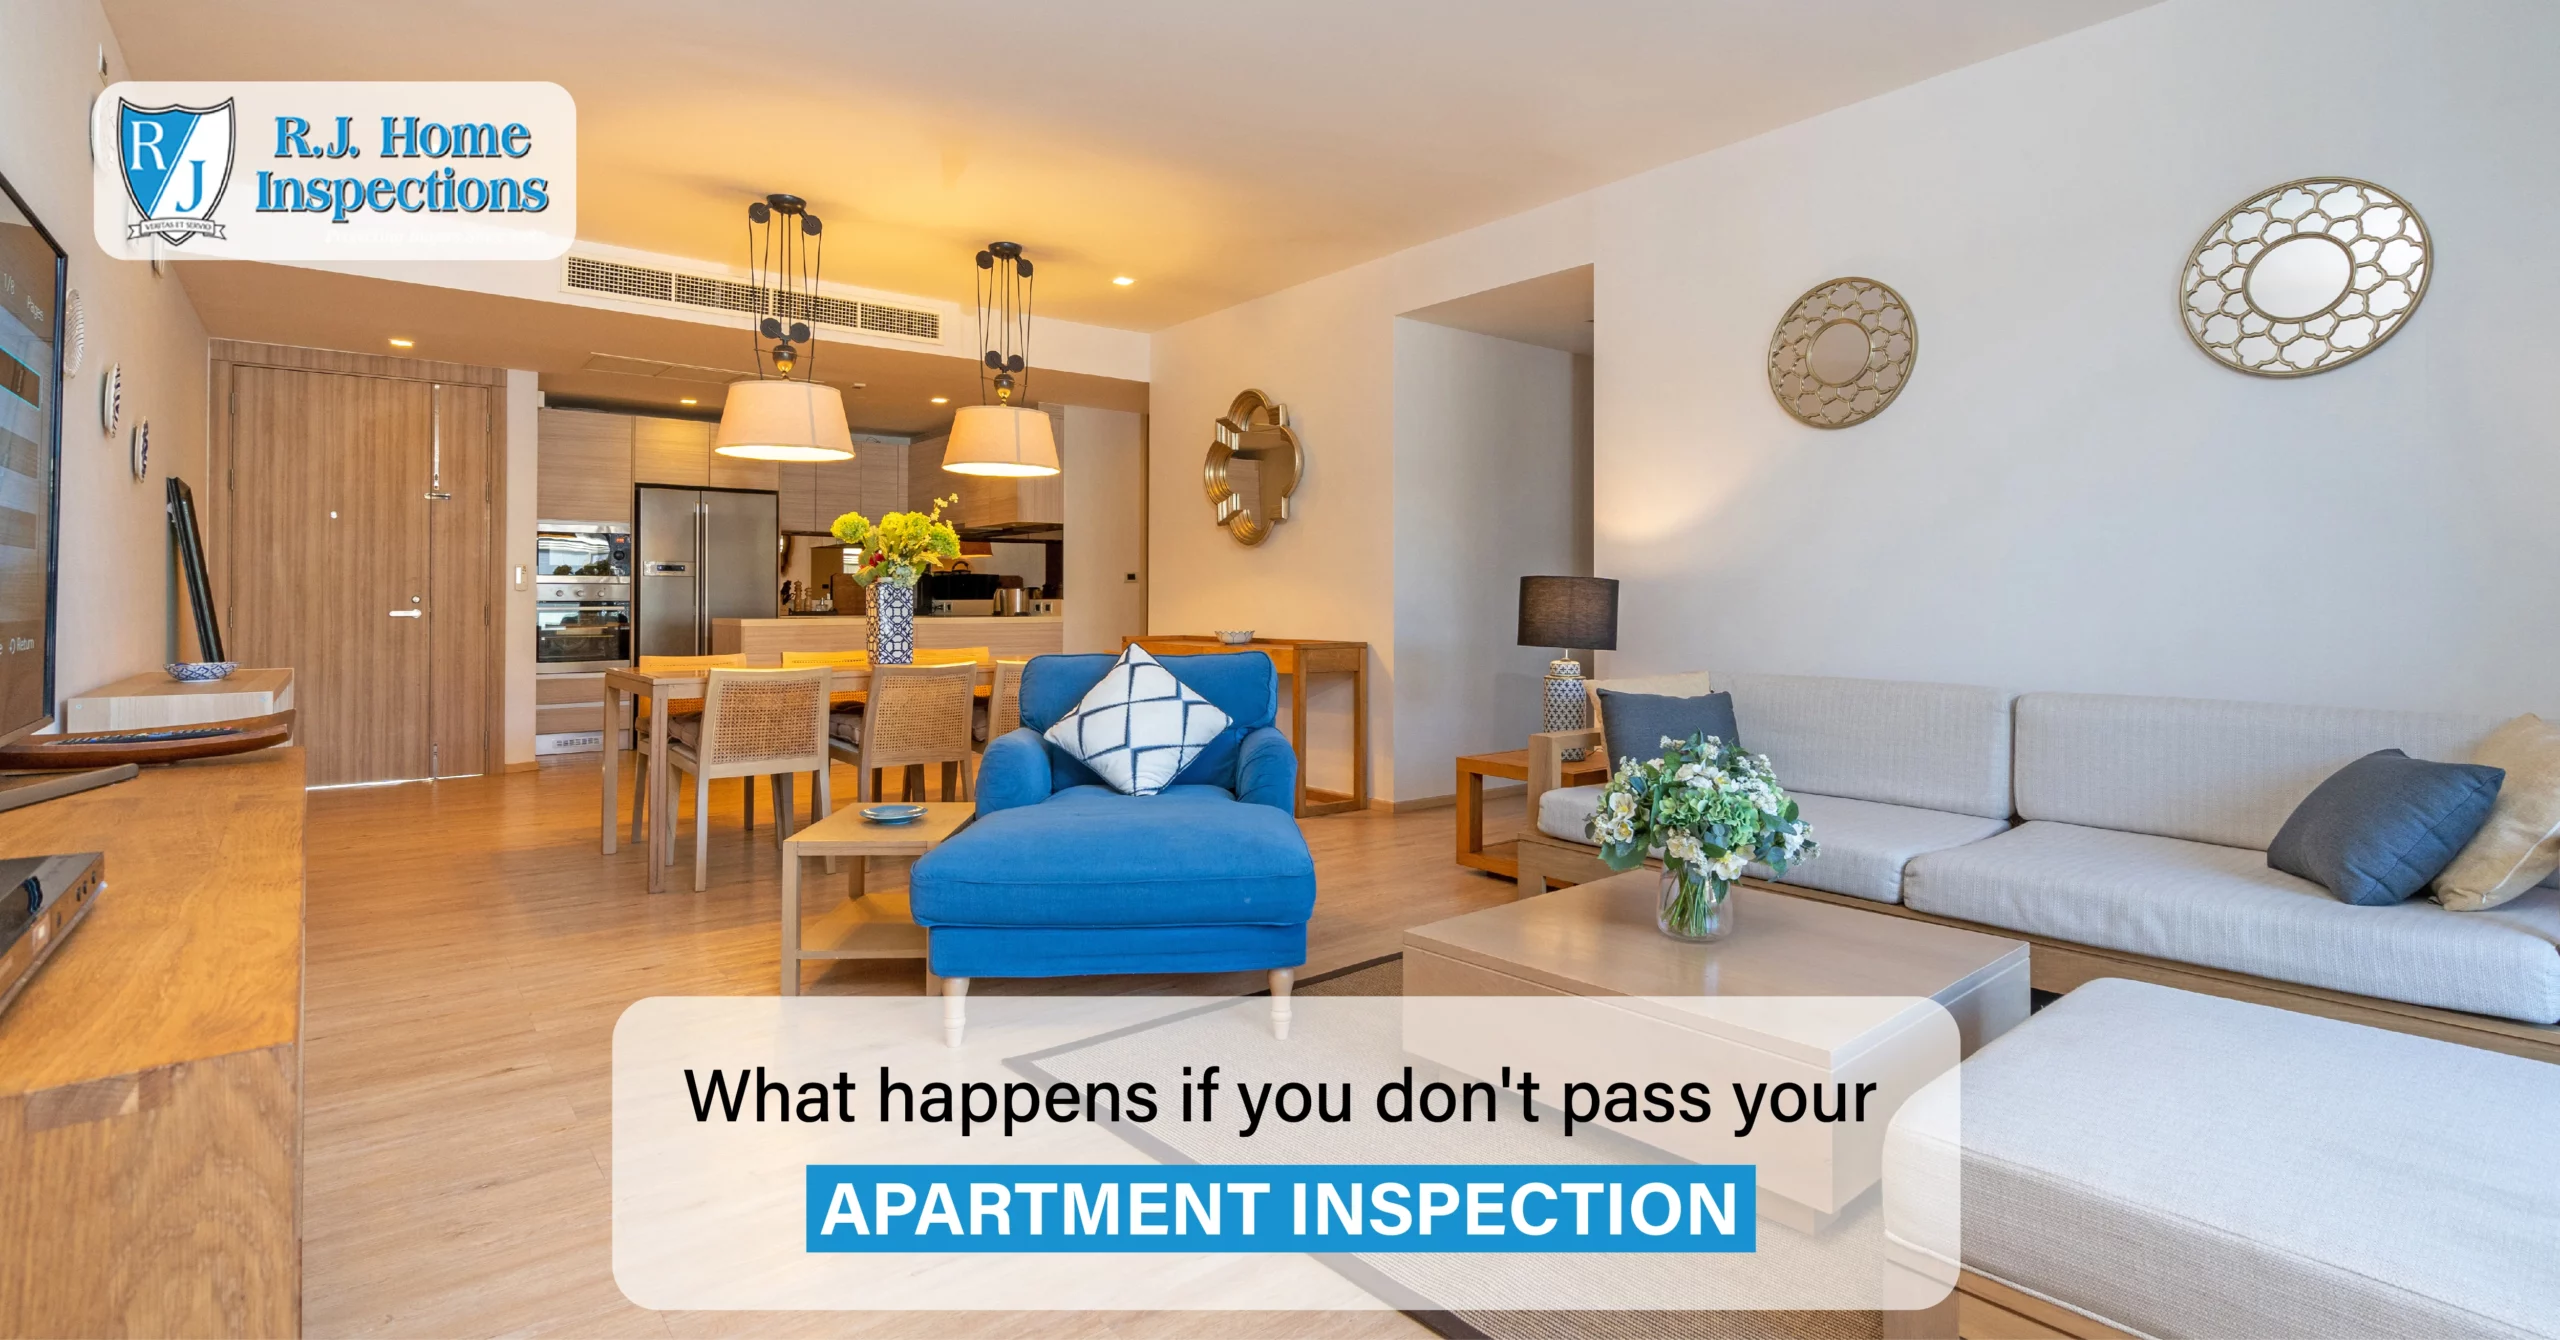 What happens if you don’t pass your apartment inspection